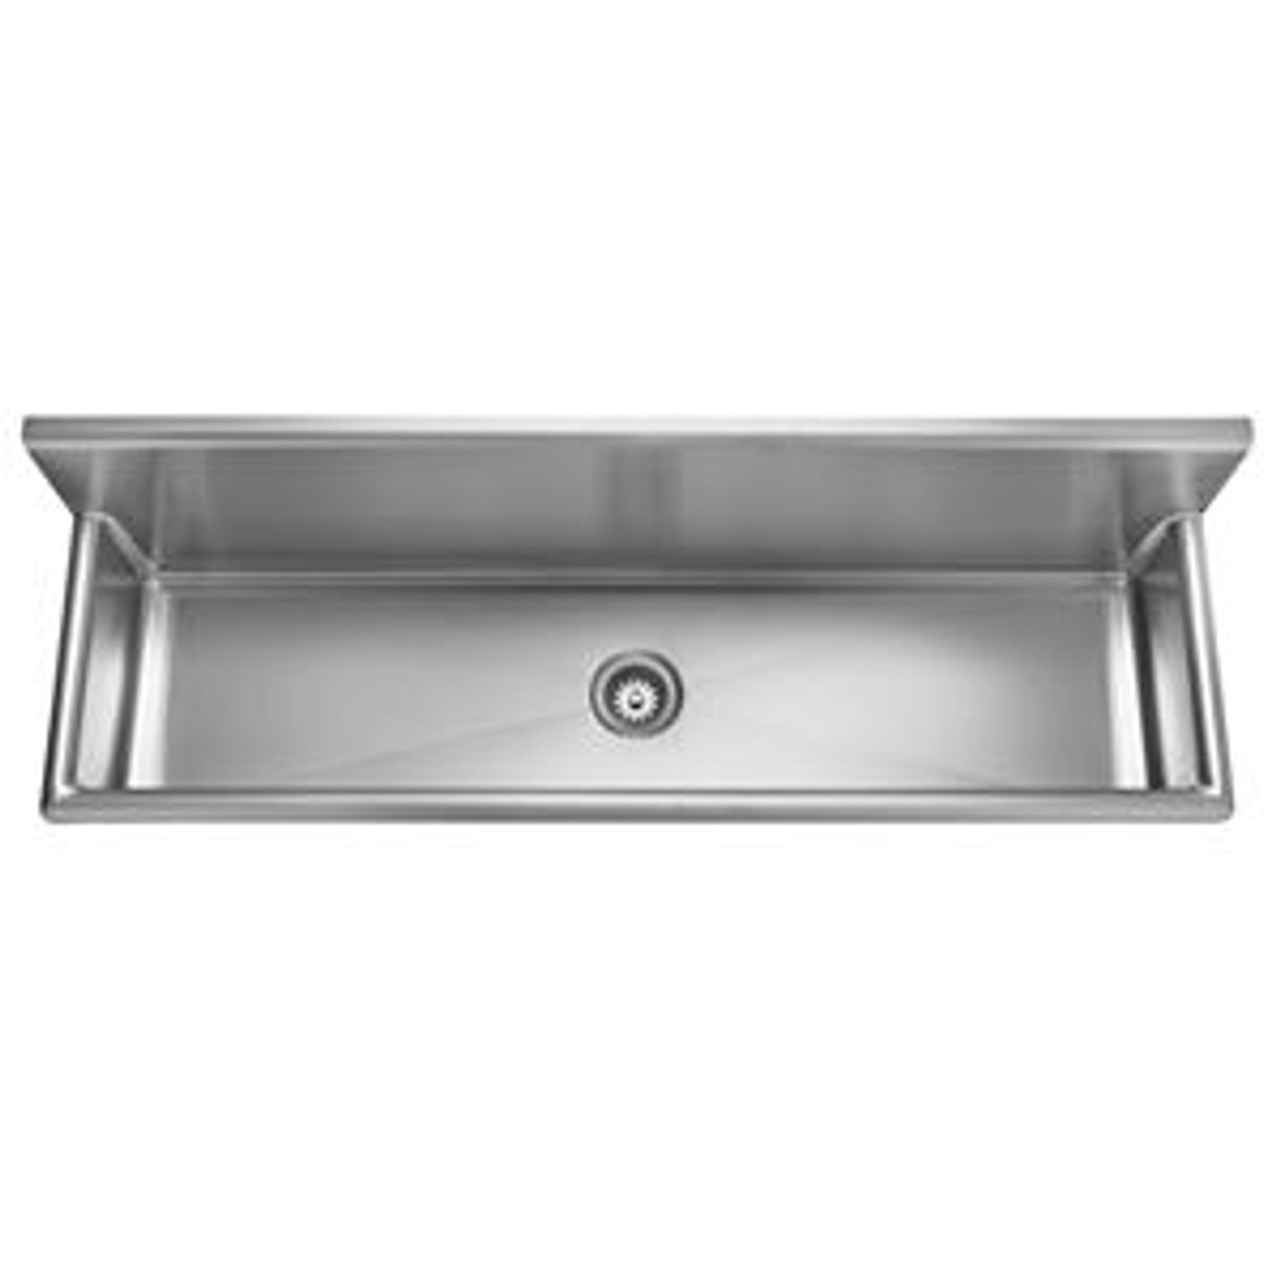 Kindred Wts72 1 Single Bowl Wall Mount Trough Sink No Hole 3 1 2